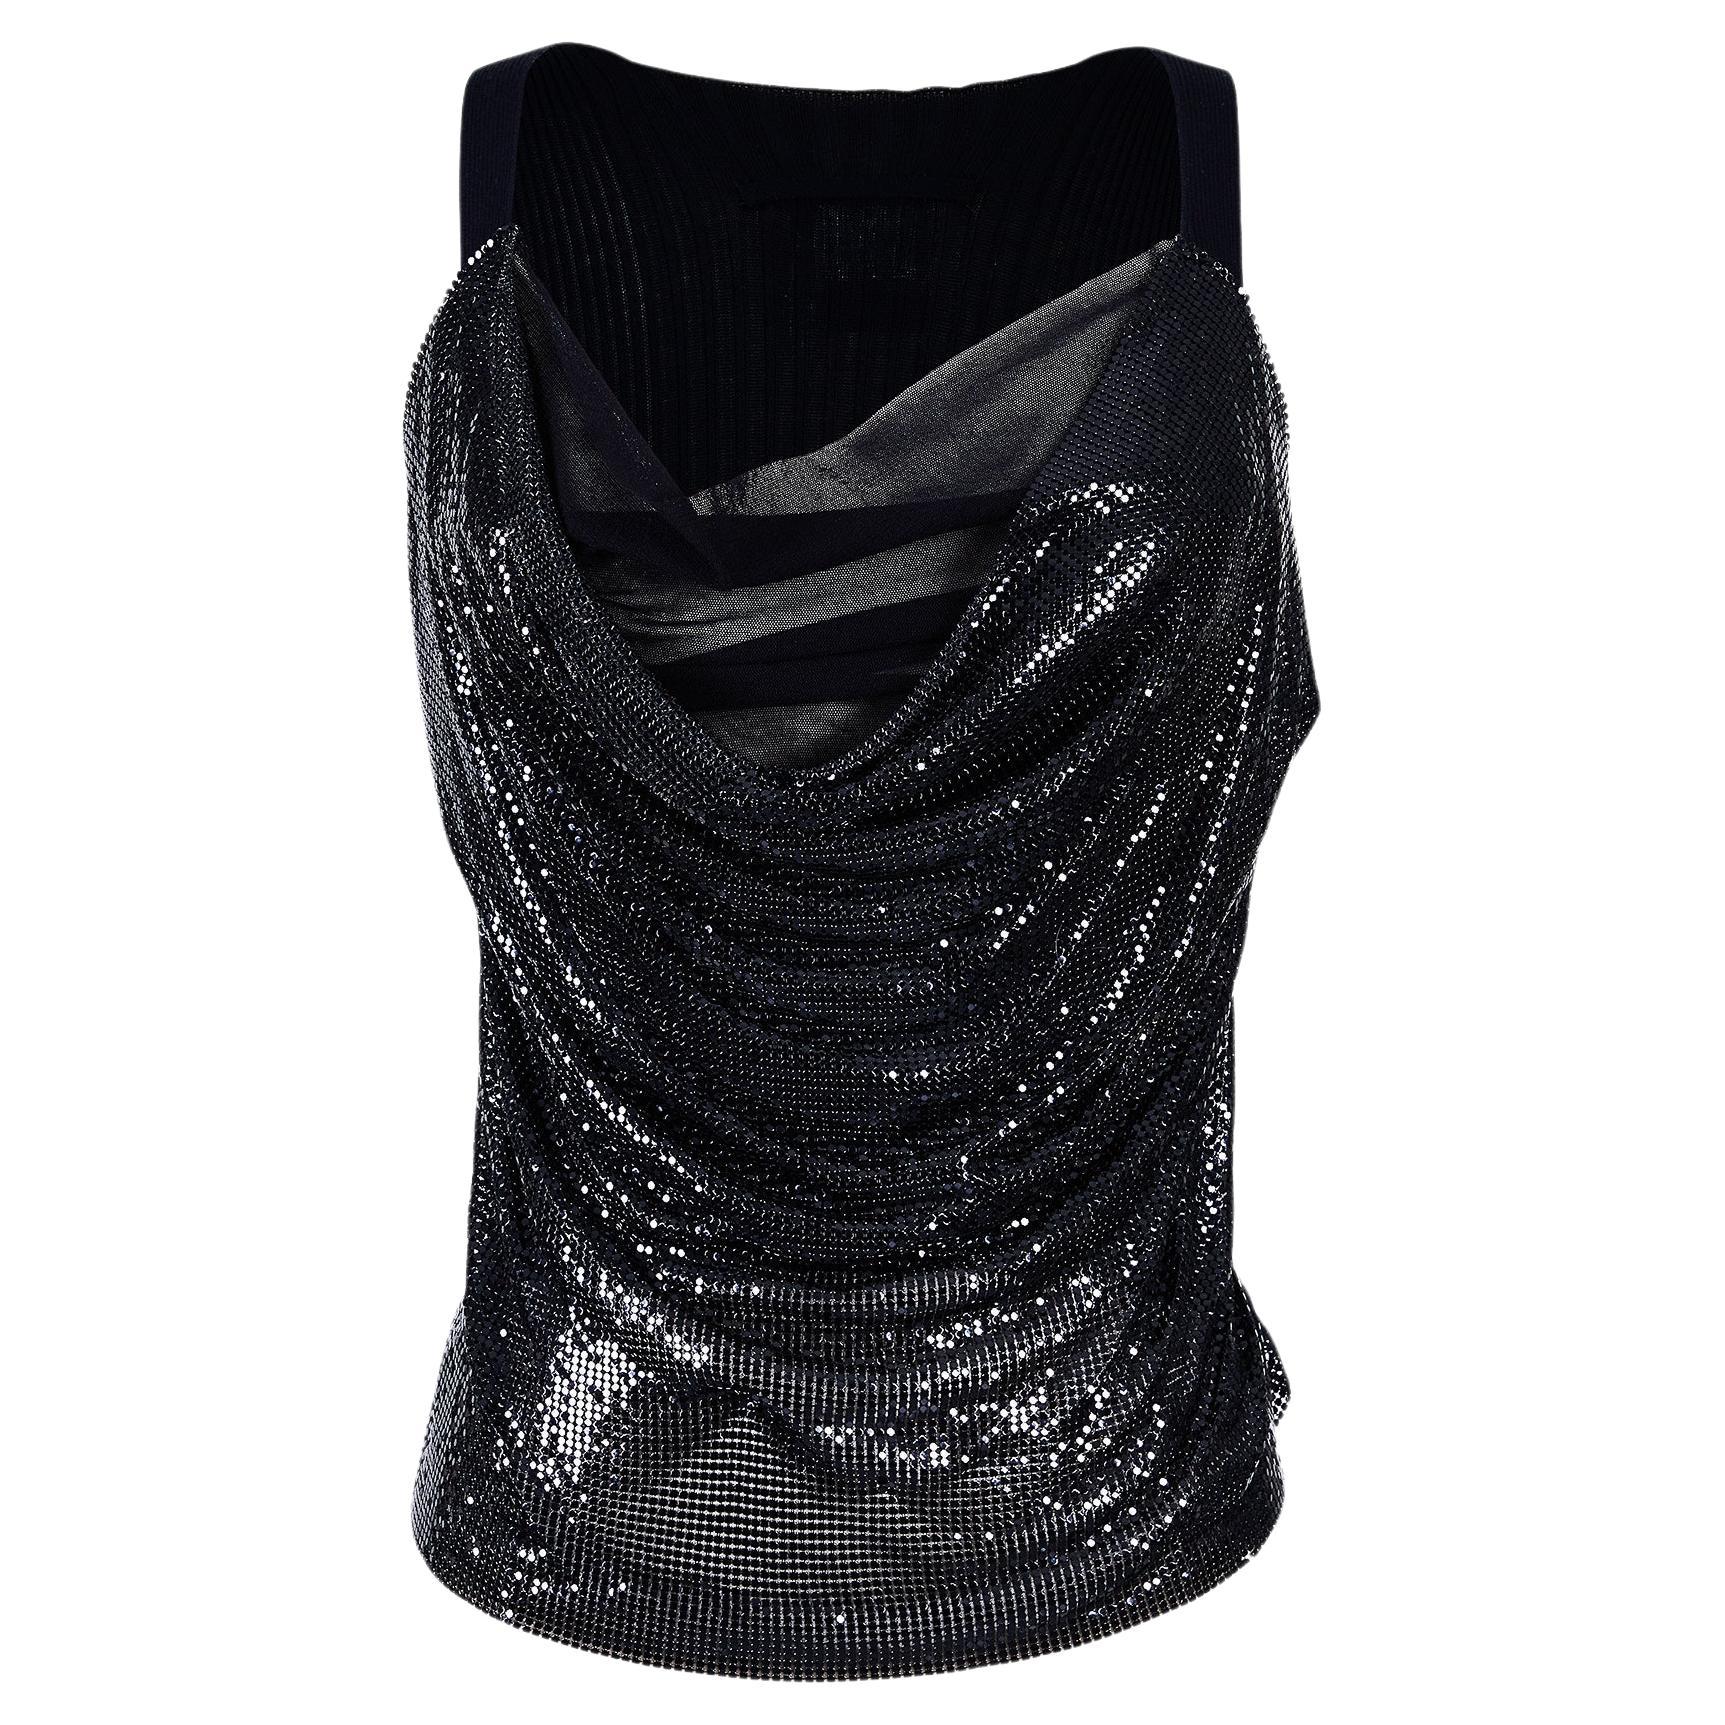 S/S 2009 Jean Paul Gaultier Black Cowl Neck Chainmail Top